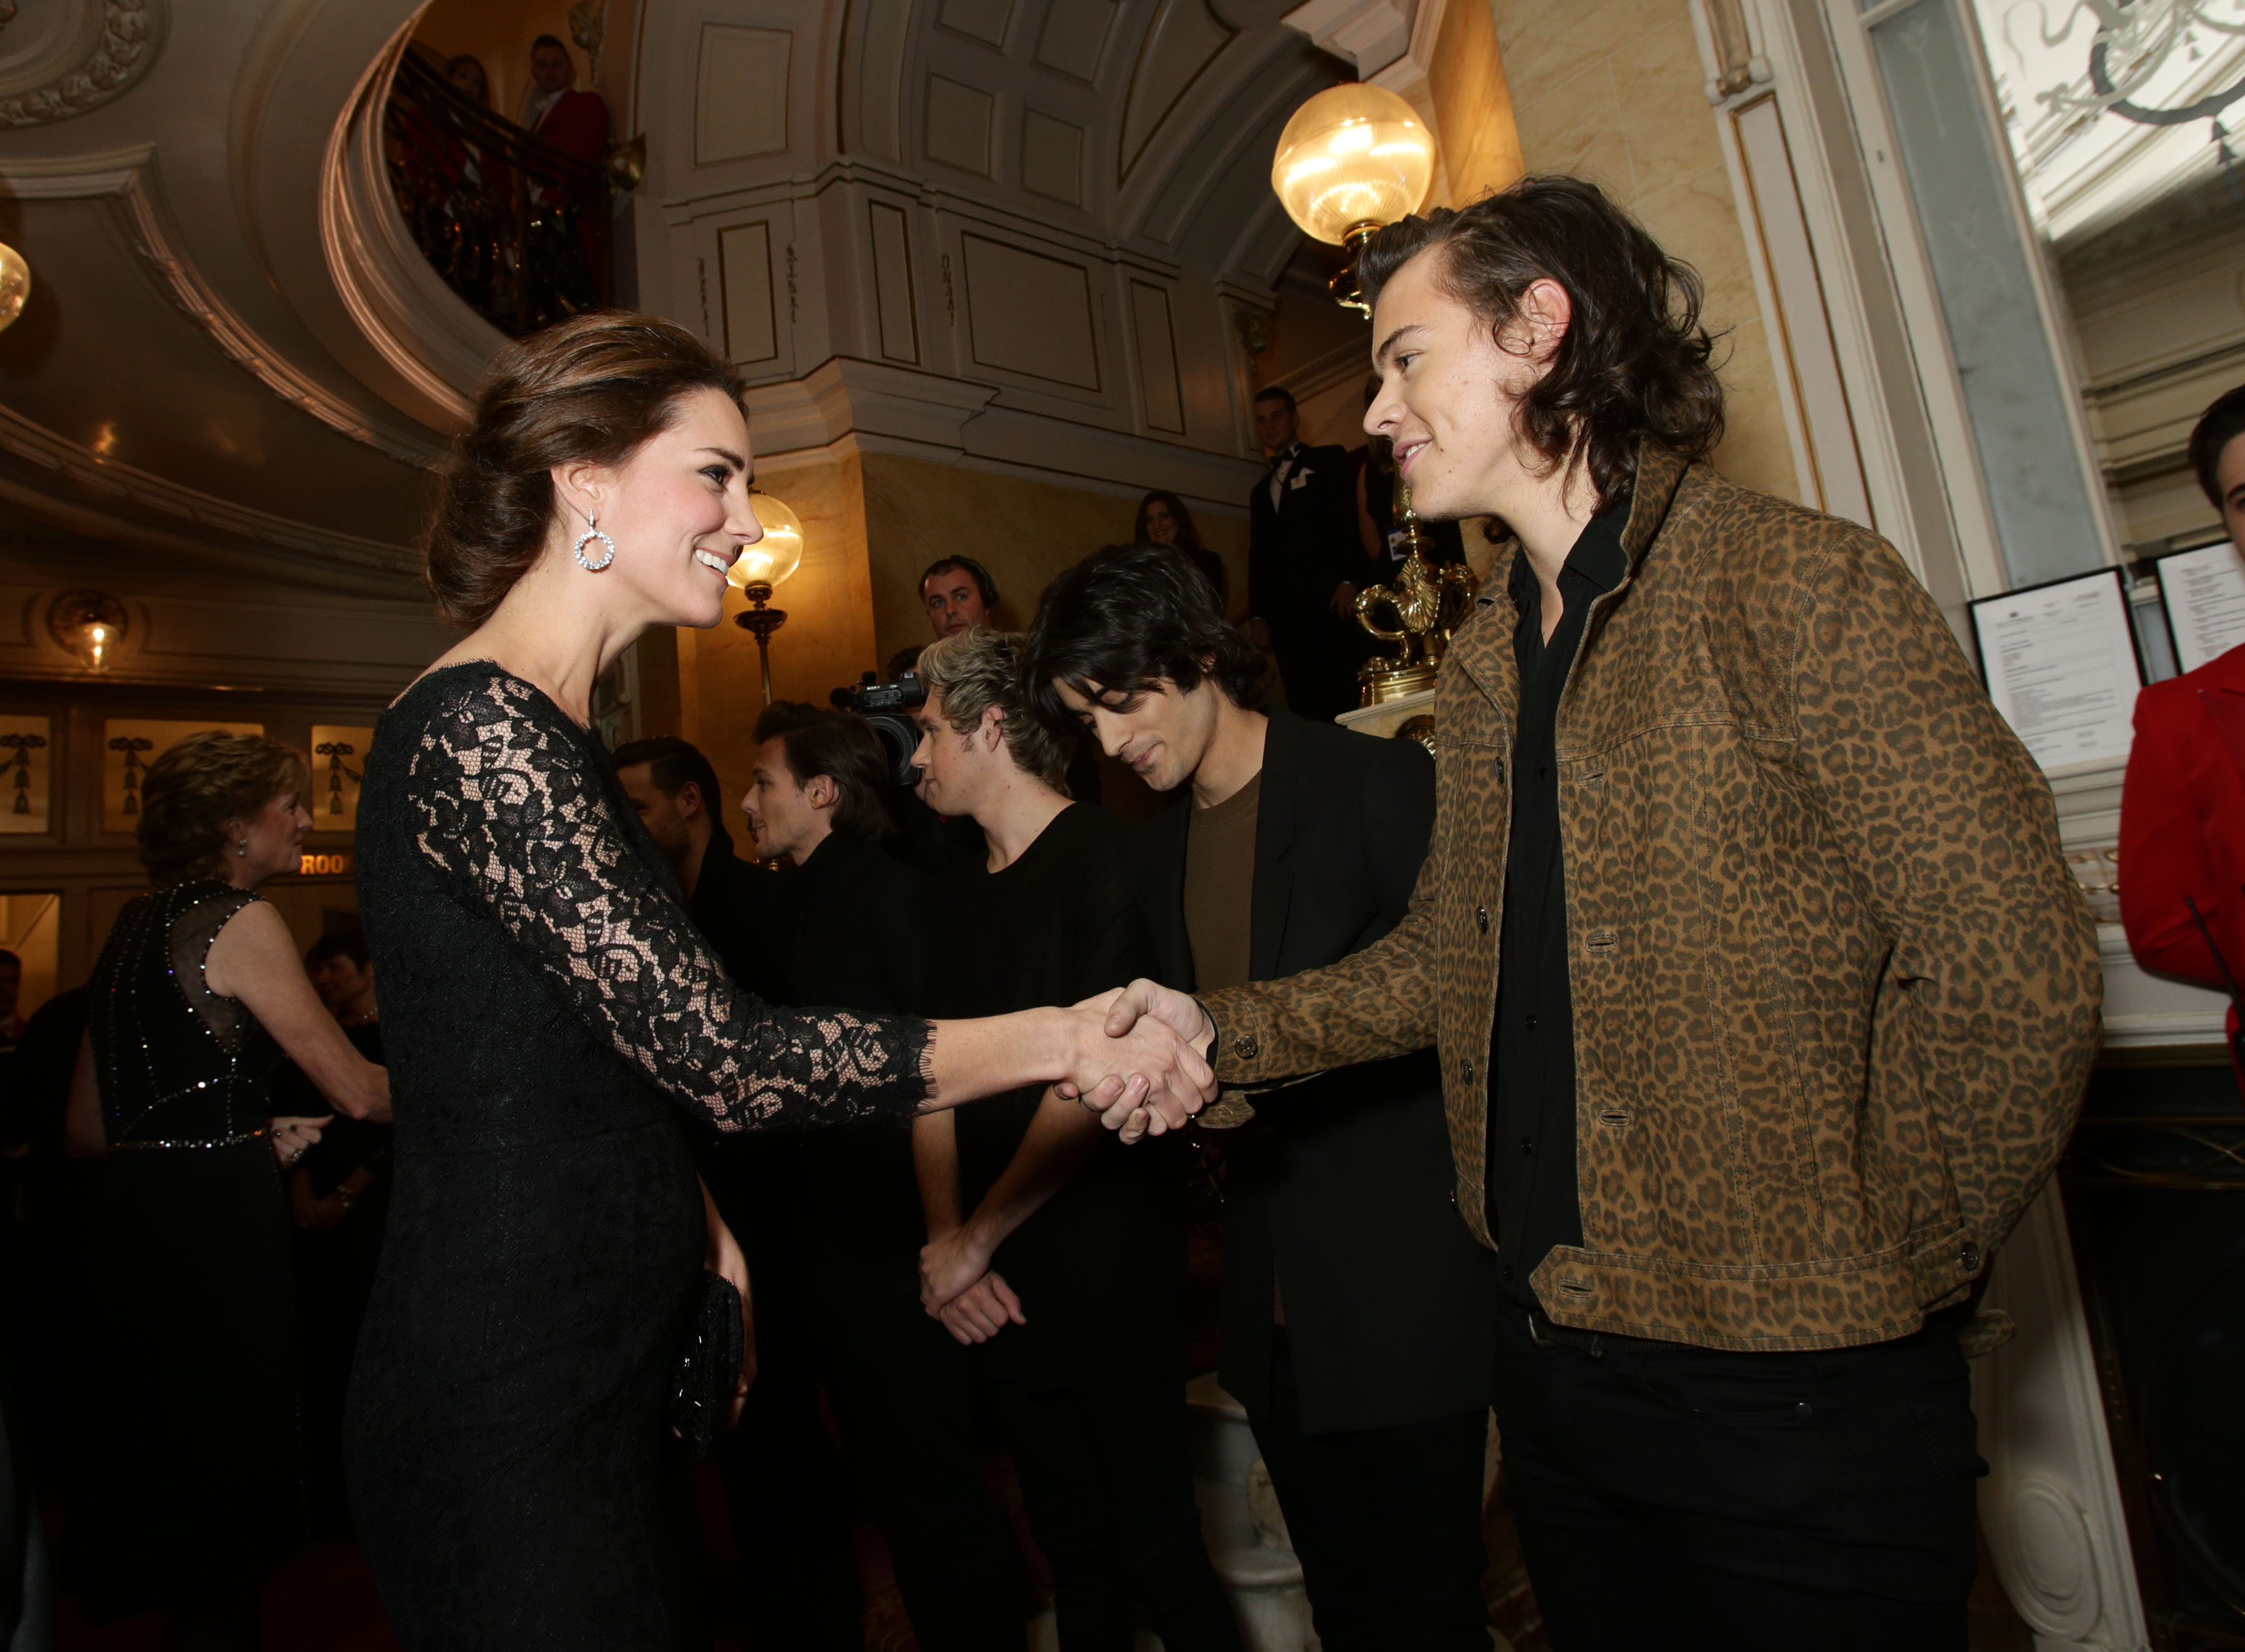 Catherine, Duchess of Cambridge meets boy band One Direction at The Royal Variety Performance at the London Palladium on November 13, 2014 in London, England. (Yui Mok—WPA Pool/Getty Images)